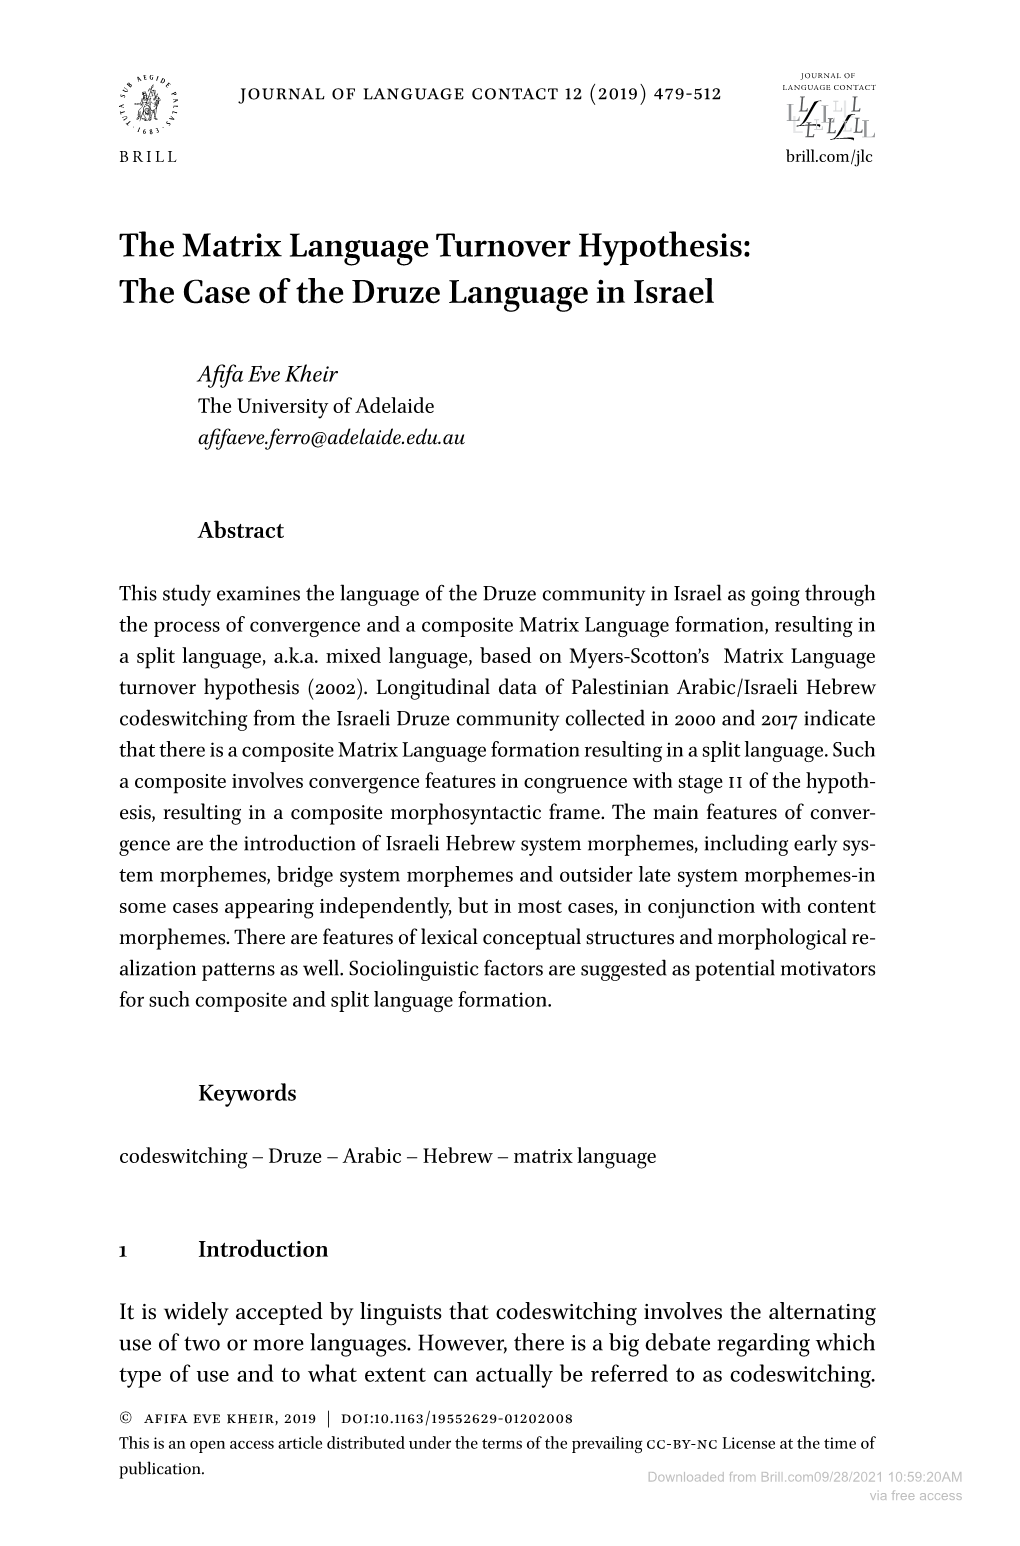 The Case of the Druze Language in Israel